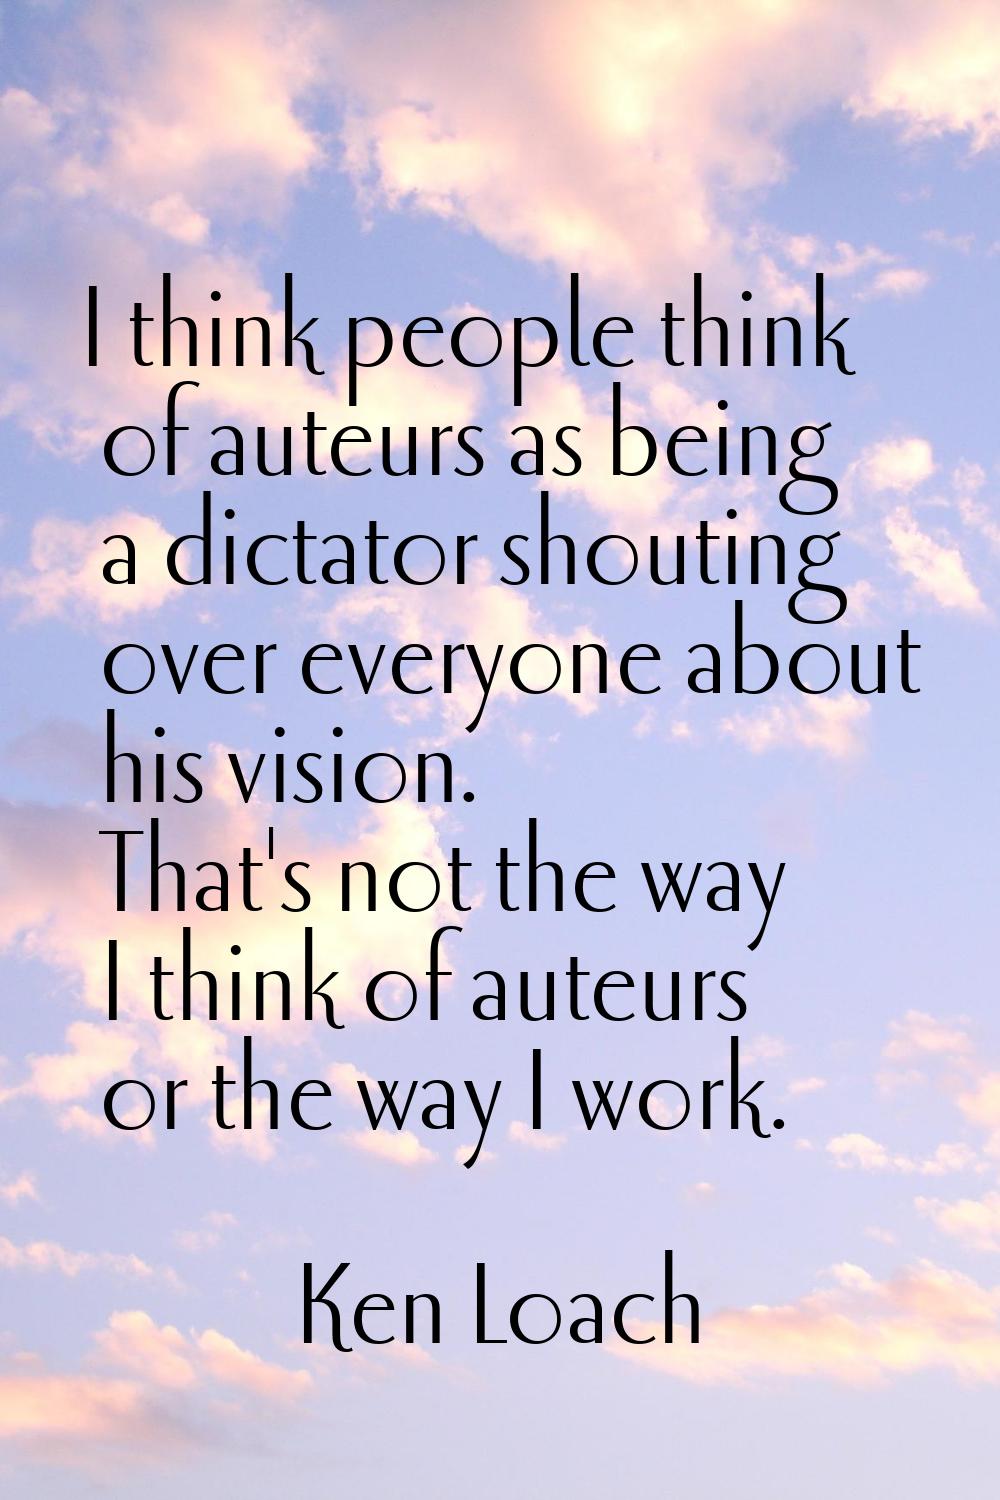 I think people think of auteurs as being a dictator shouting over everyone about his vision. That's